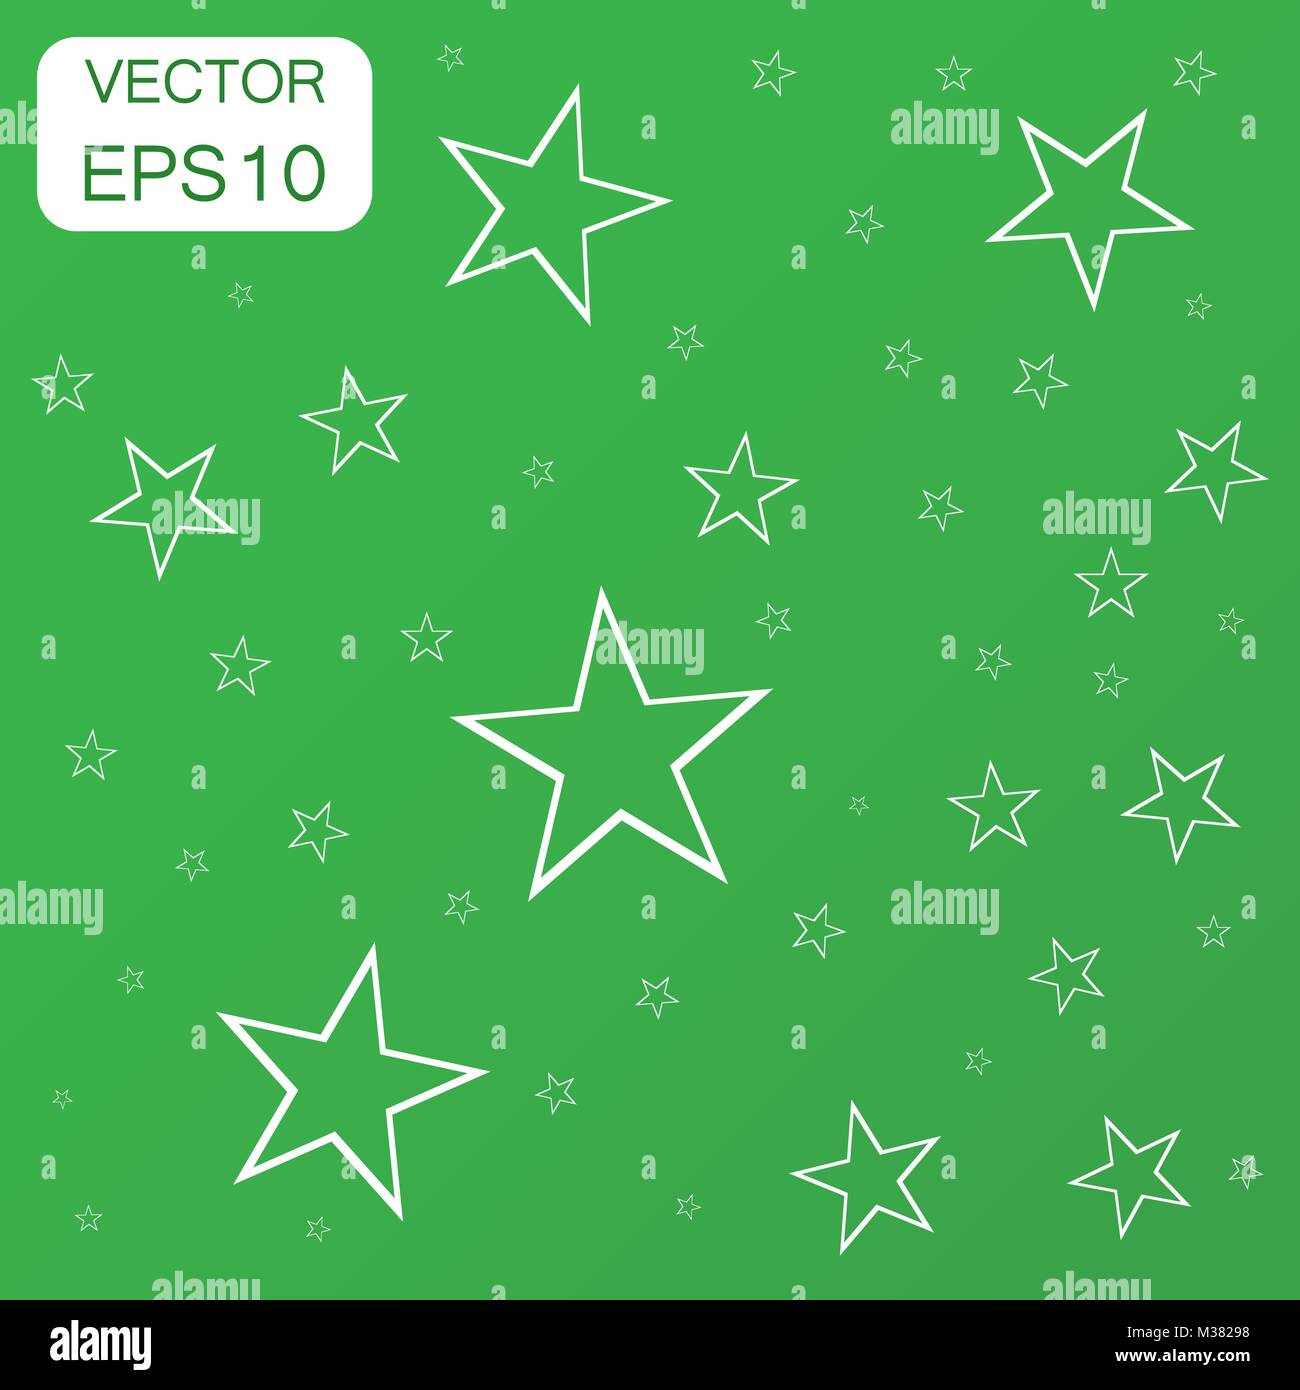 Abstract falling star icon. Business concept stars pictogram. Vector illustration on green background with long shadow. Stock Vector